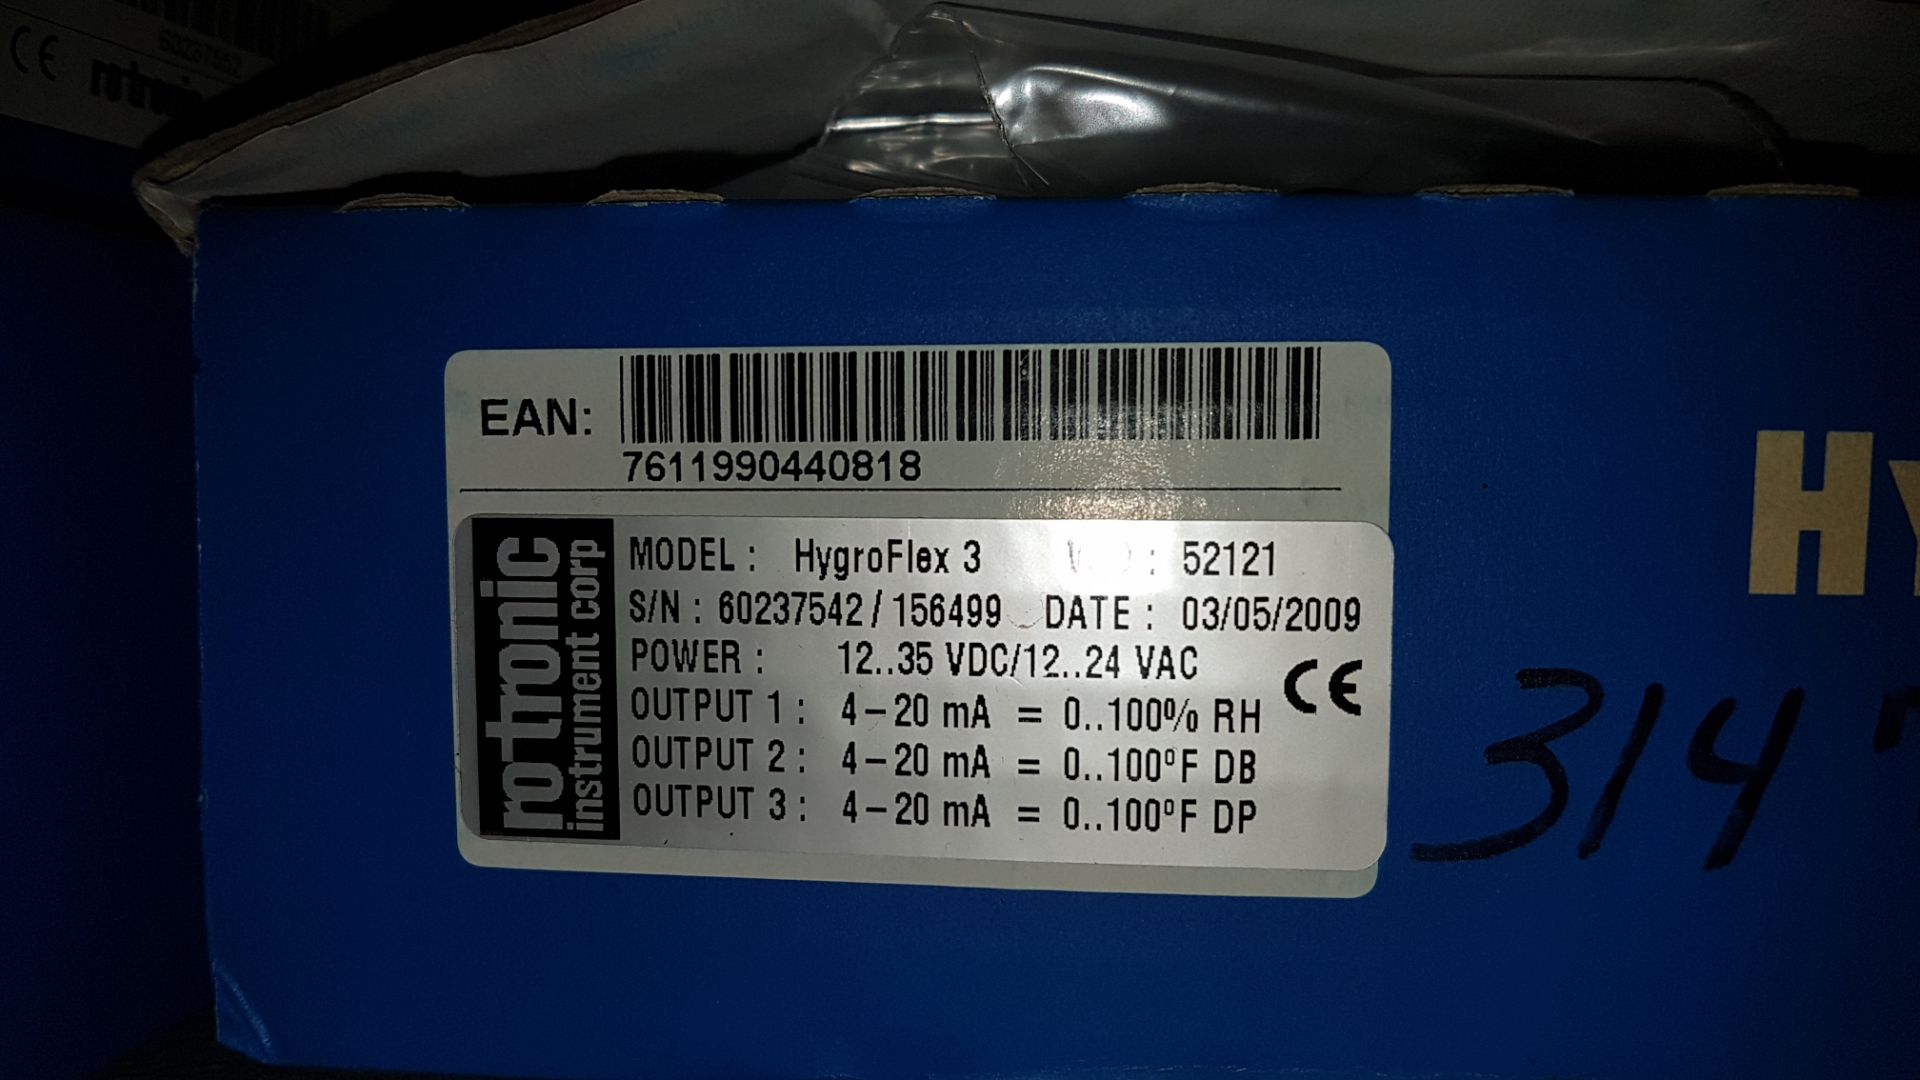 Lot of (4) Rotronic Humidity Transmitters, Model Hygroflex 3, brand new in box. - Image 5 of 5